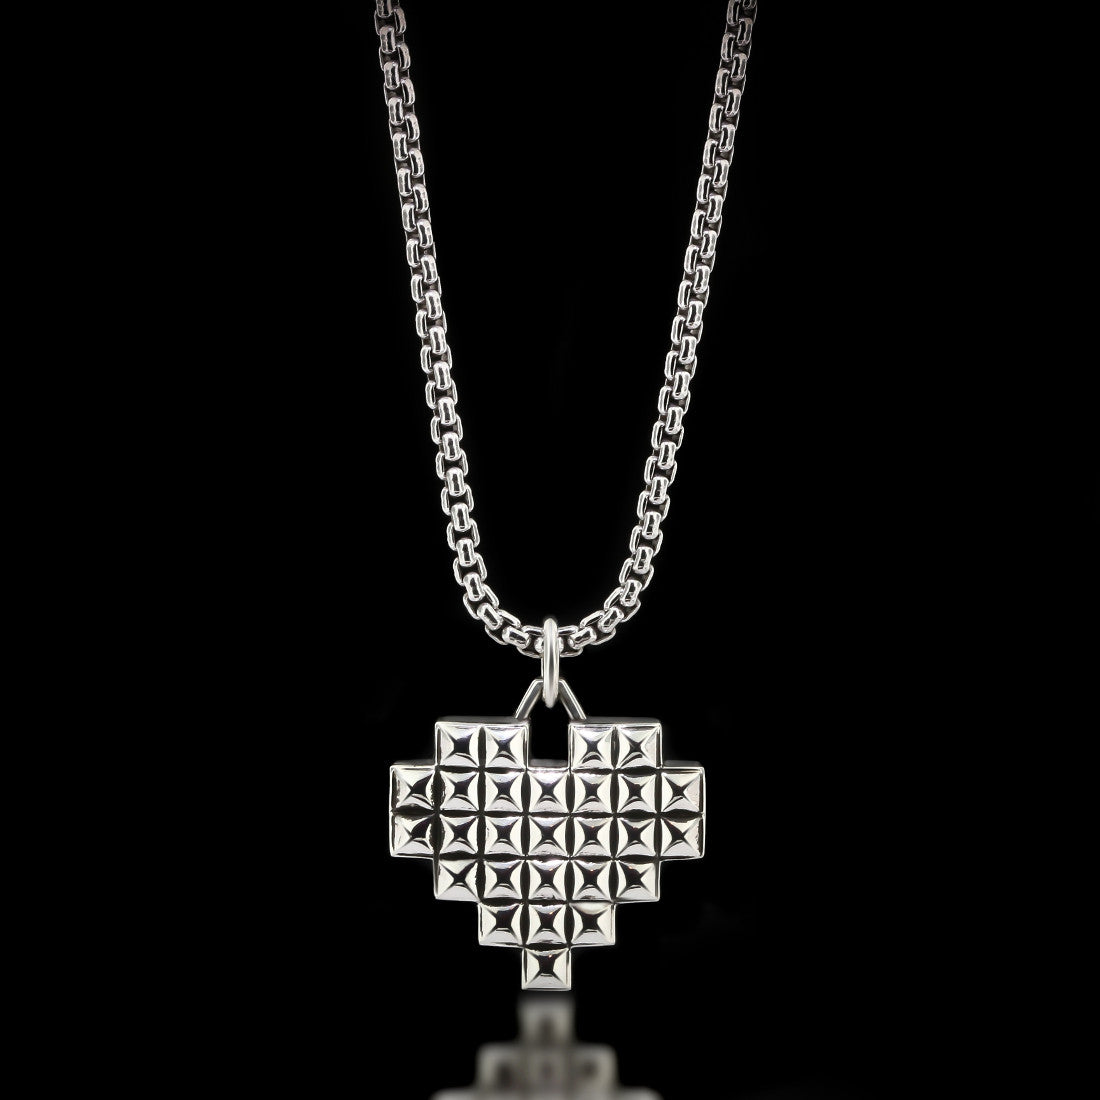 Pixelated Heart Necklace - Sterling Silver - Twisted Love NYC